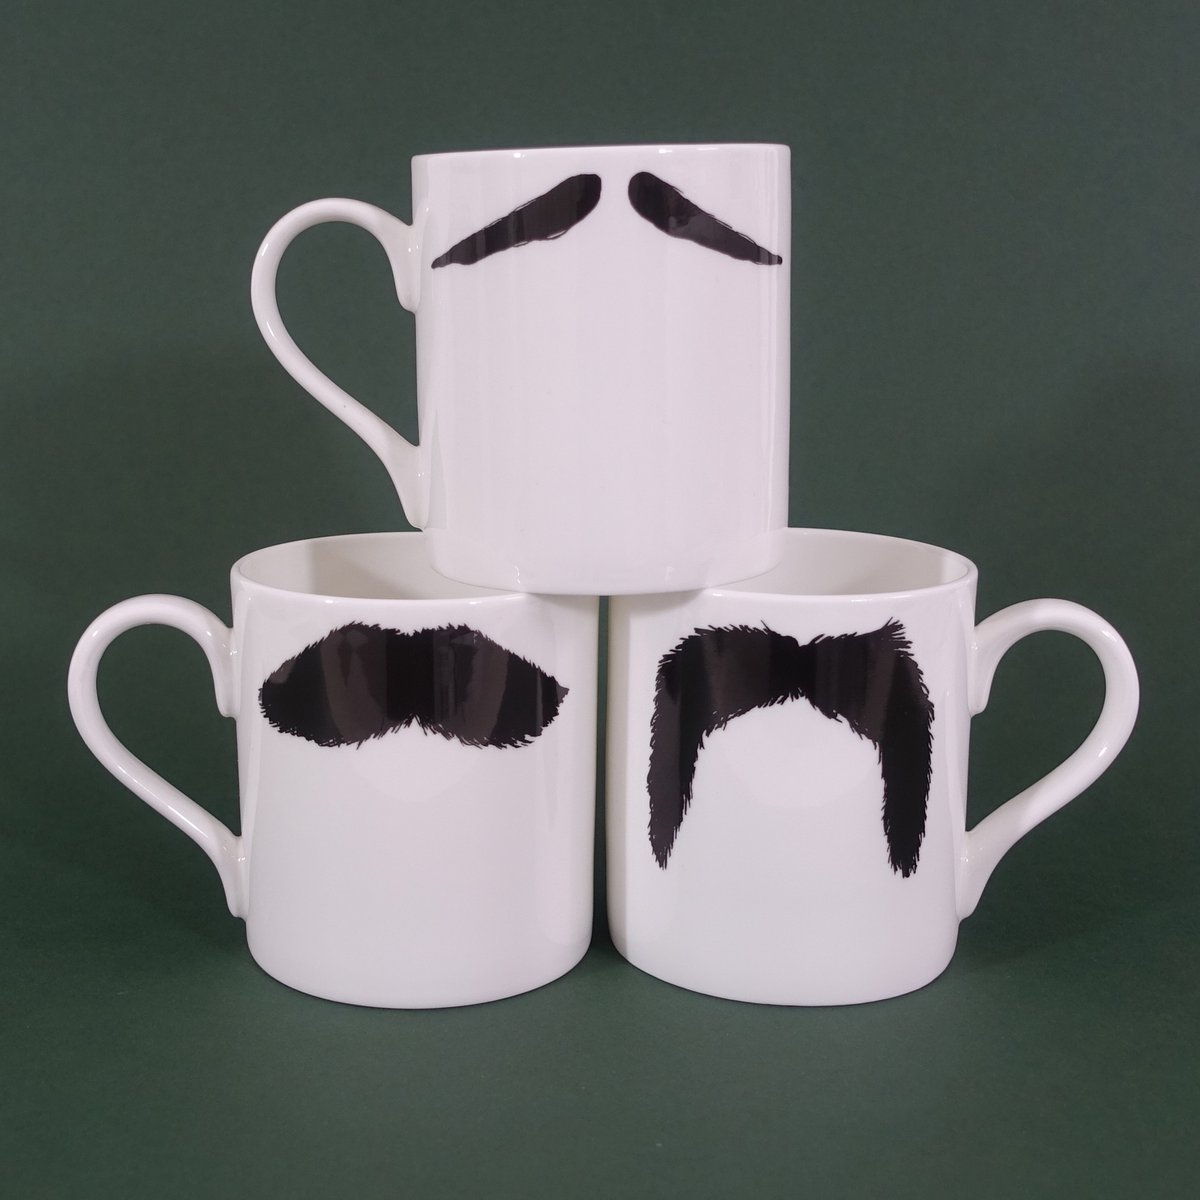 https://assets.bigcartel.com/product_images/249523259/moustache+mug+threesome+01+02.jpg?auto=format&fit=max&w=1200